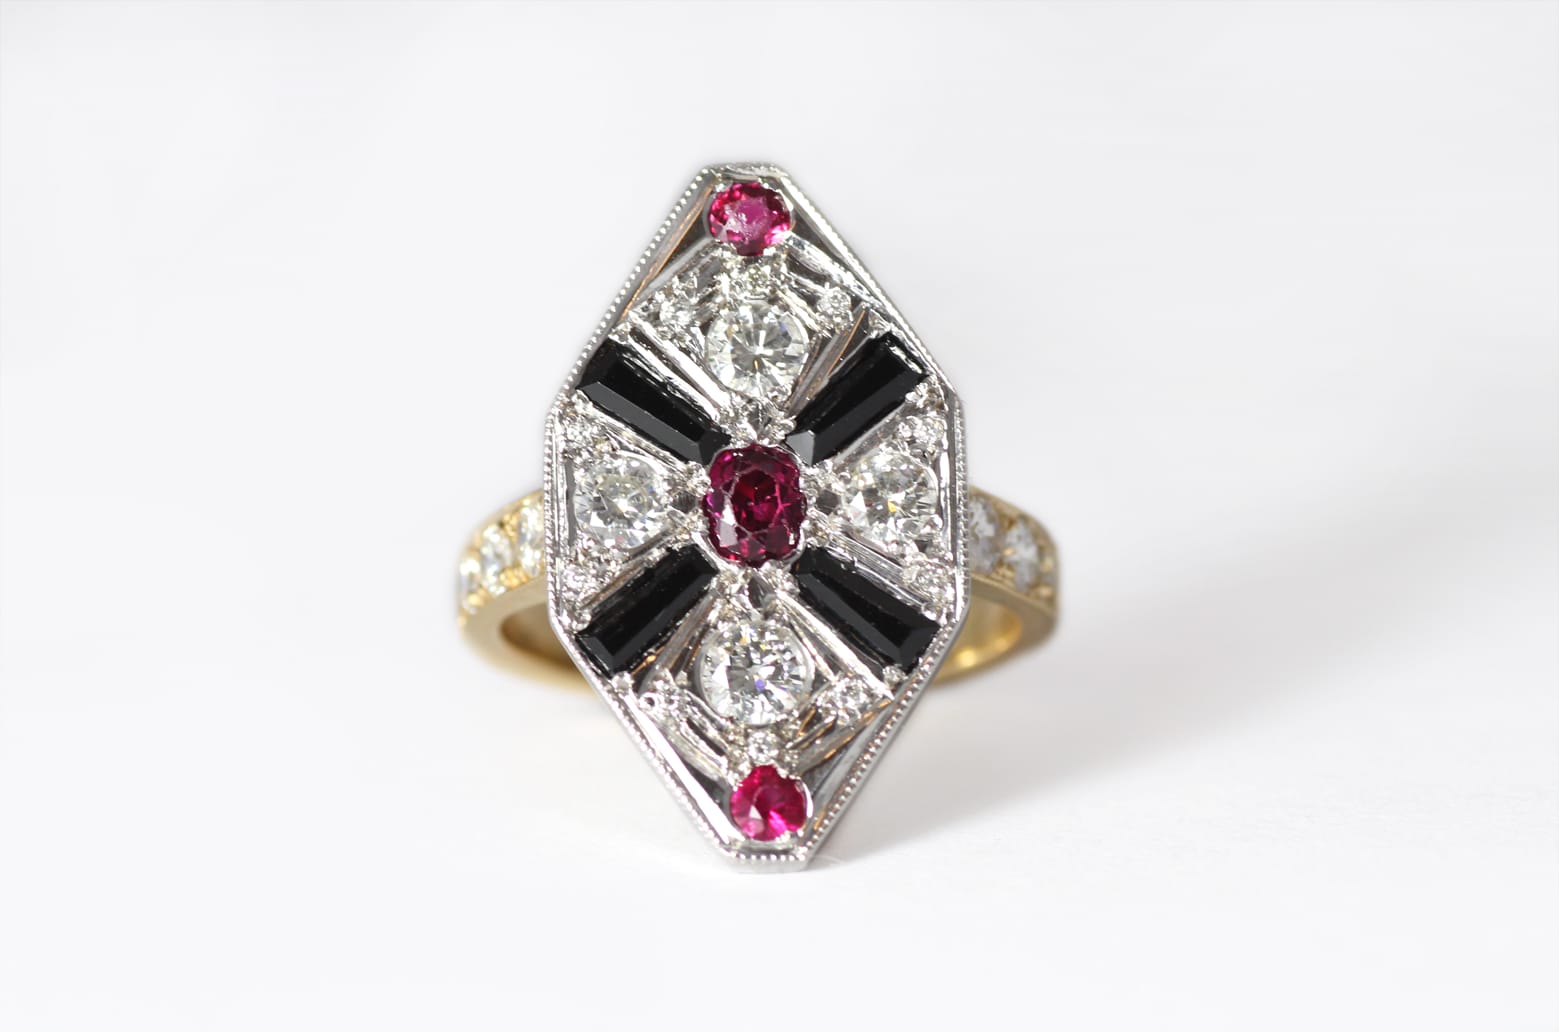 Recycled gold with rubies, diamonds and black spinel by Zoe Pook Jewellery